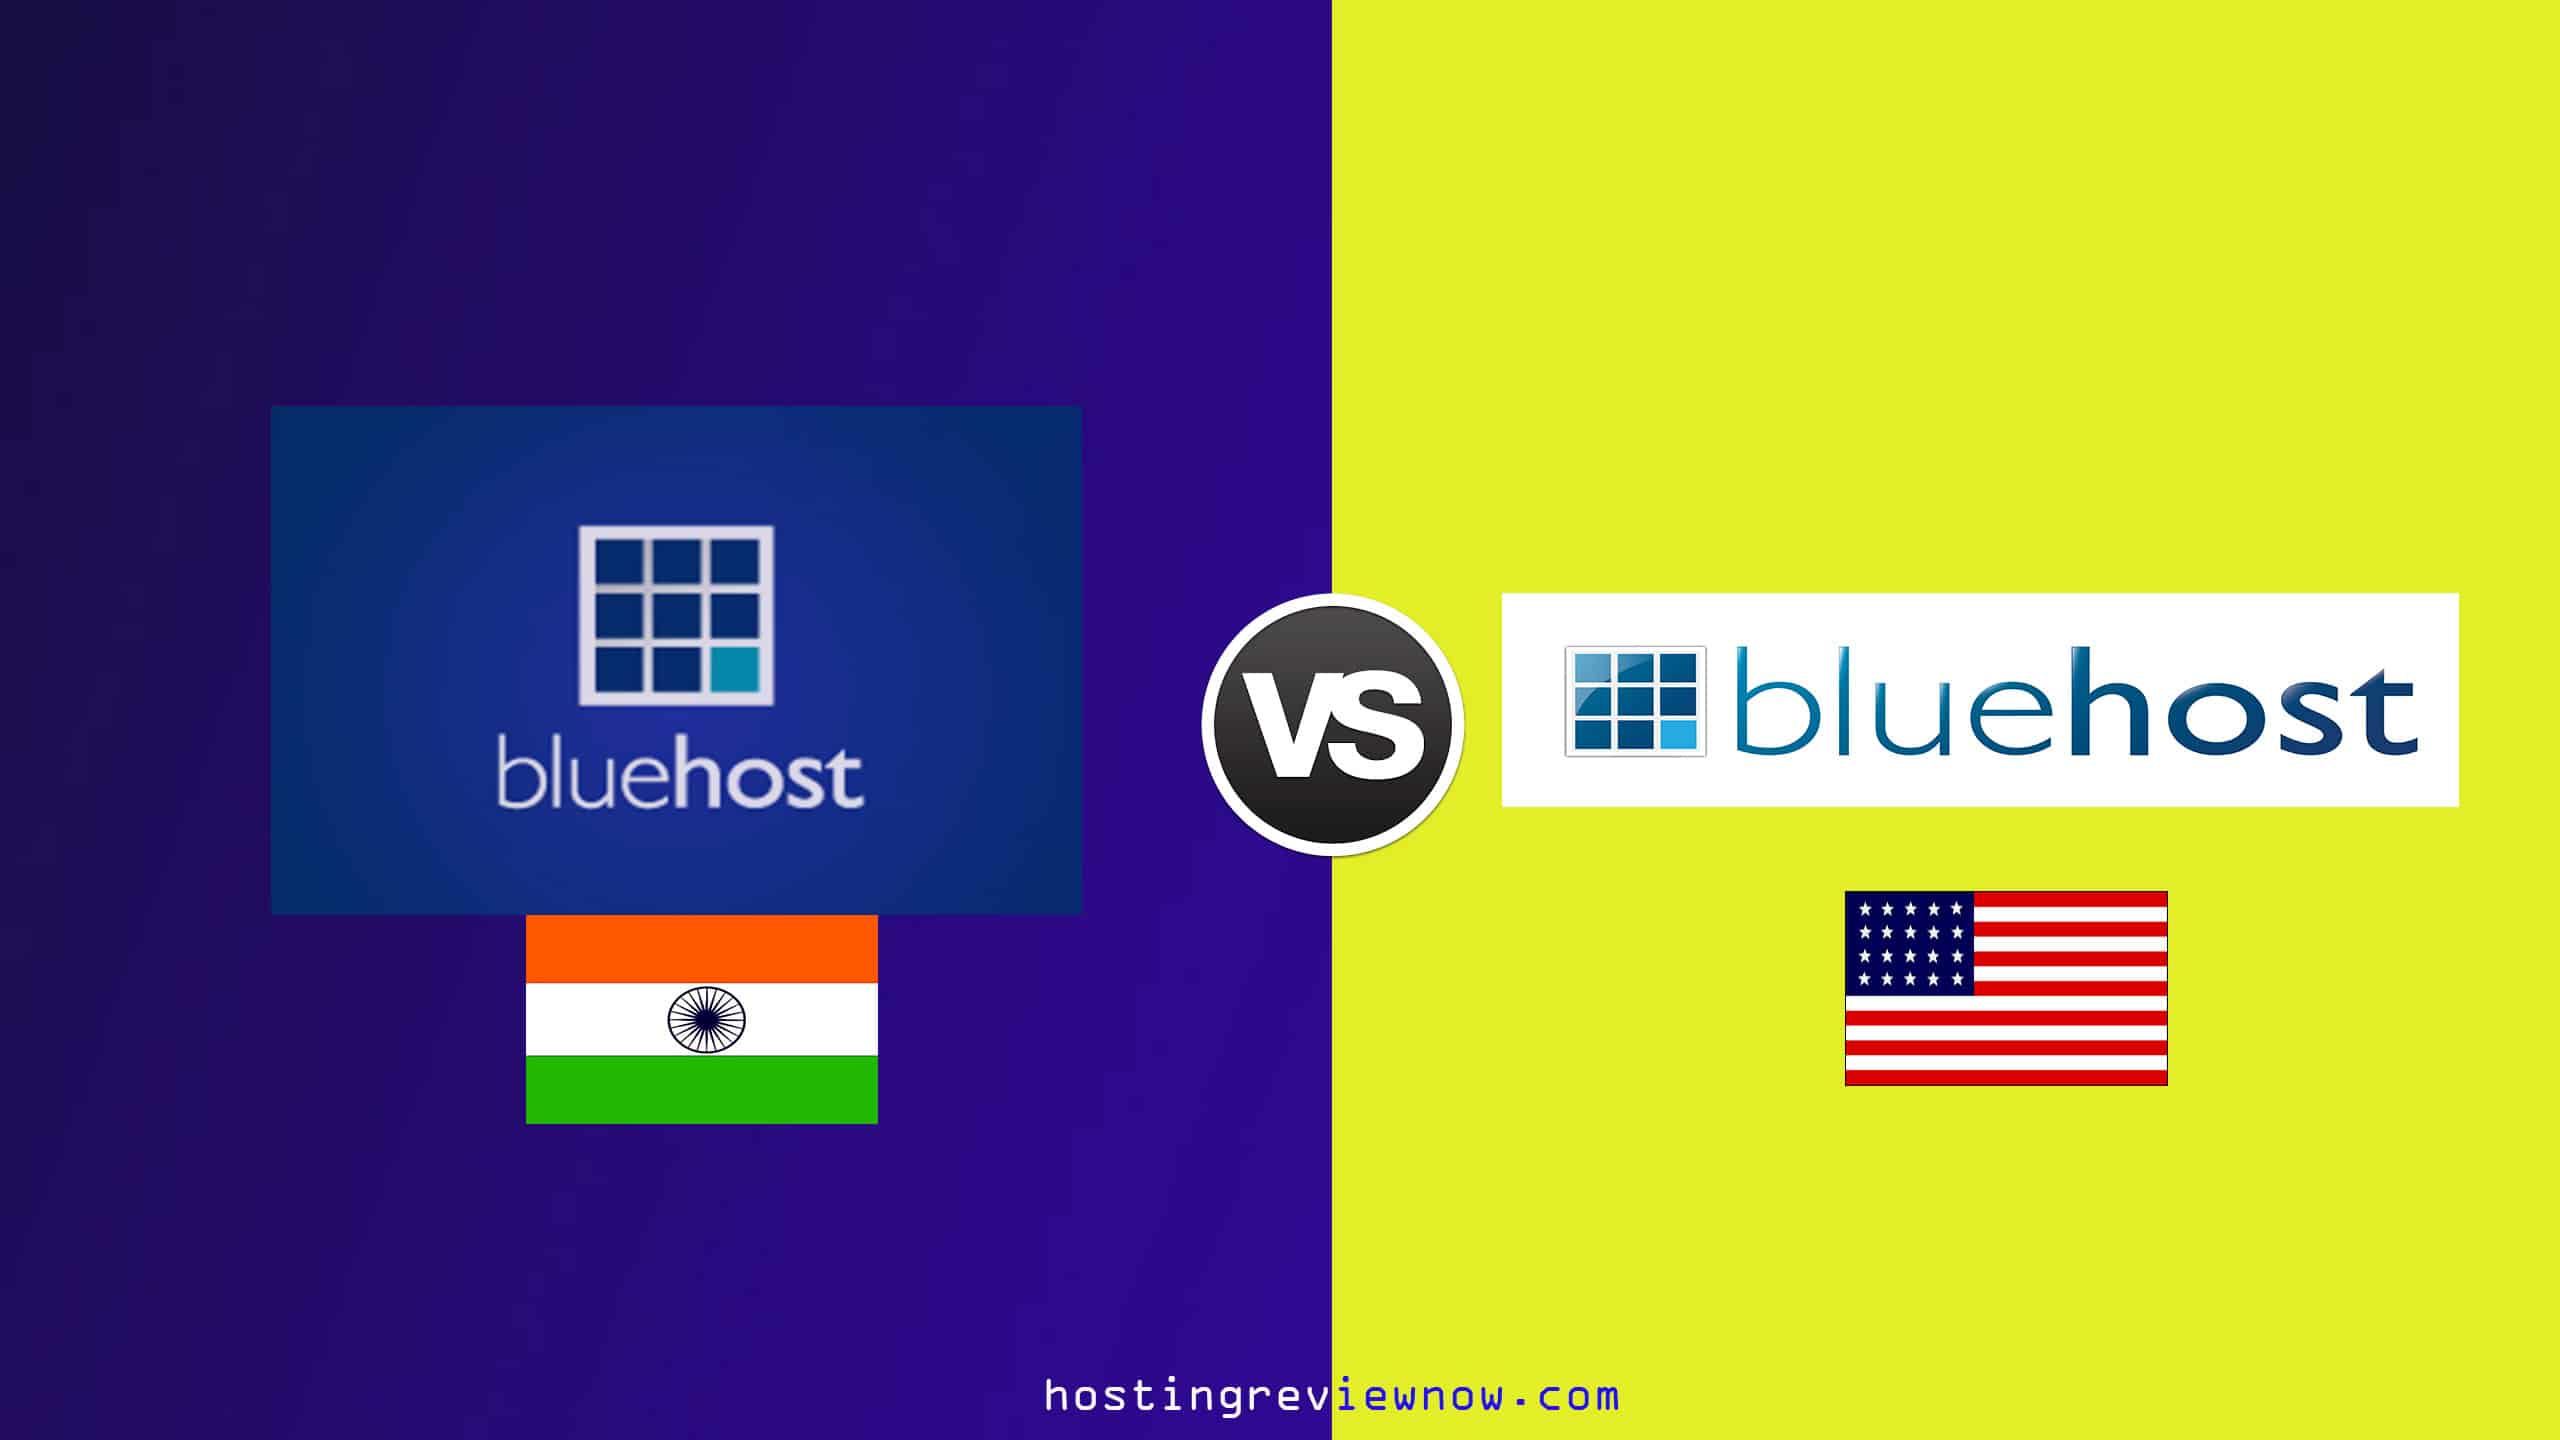 Bluehost india vs bluehost us